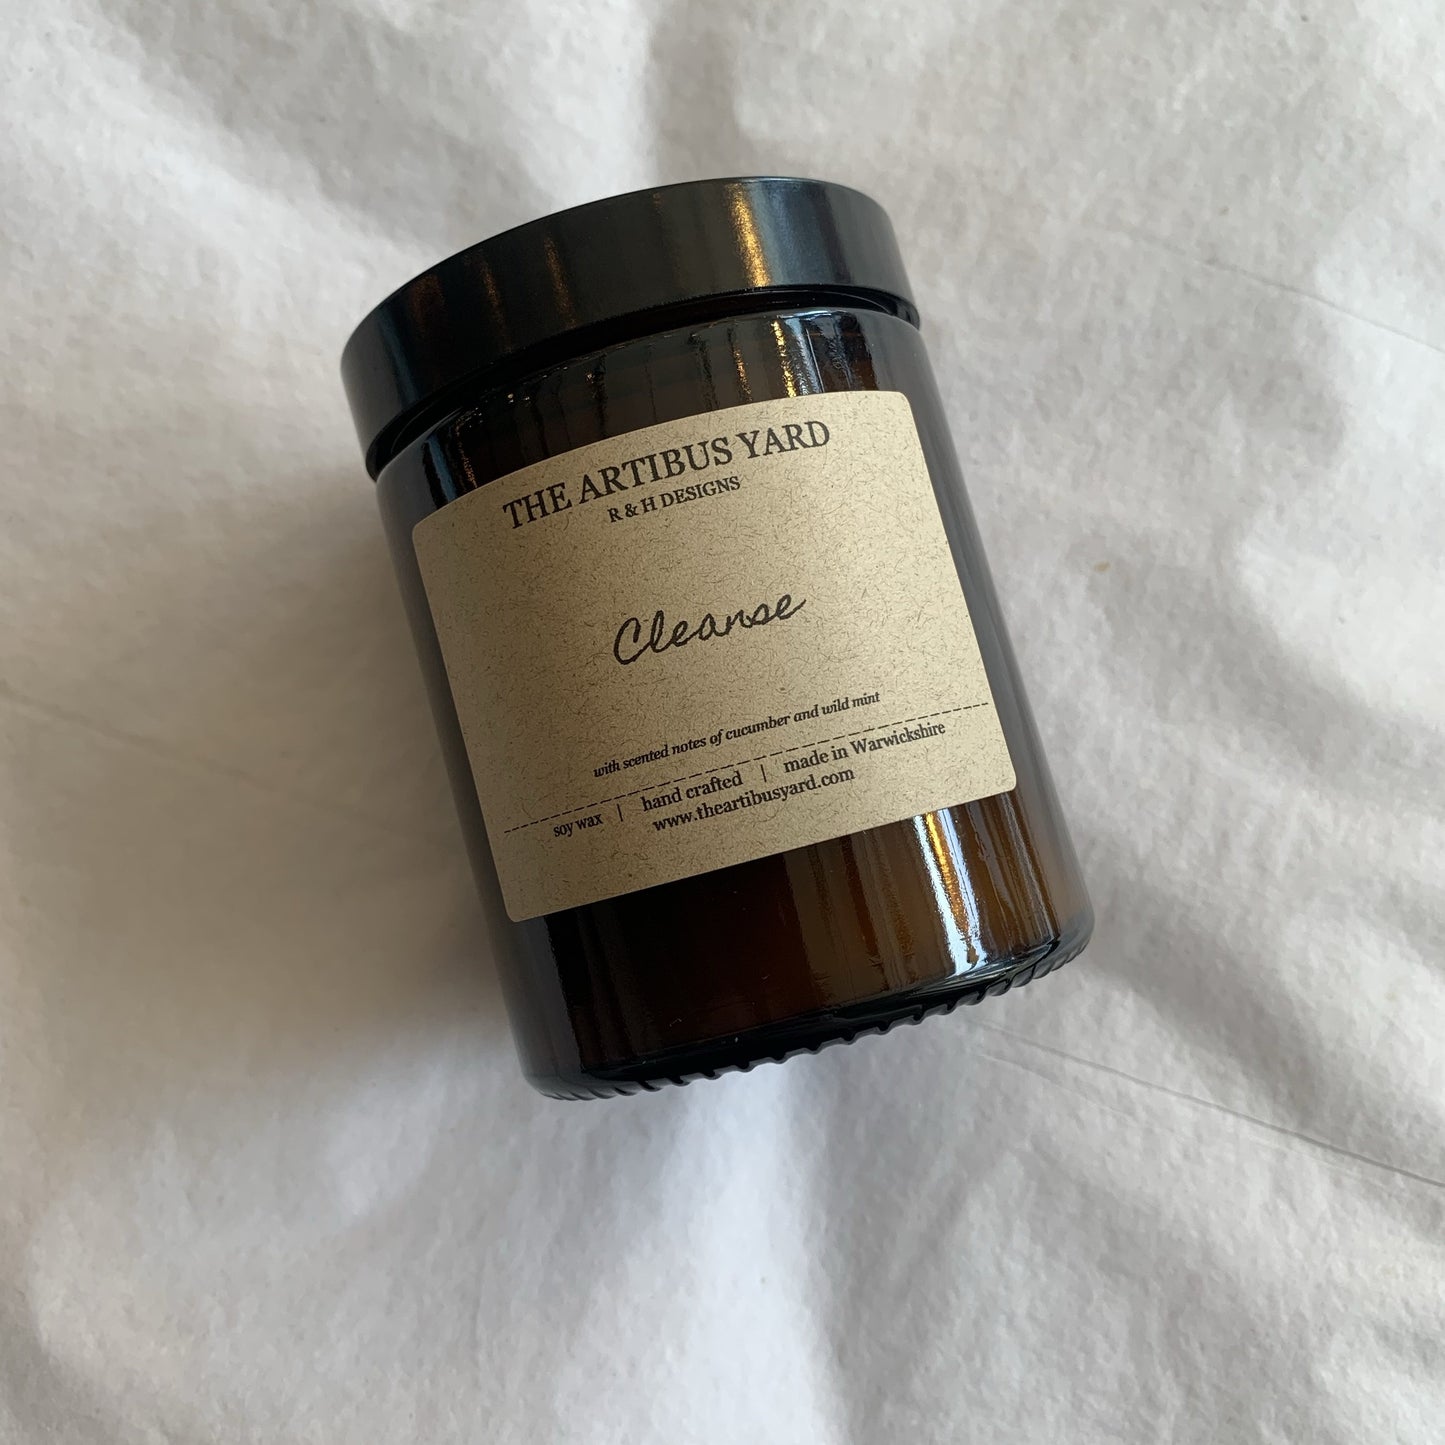 Cleanse, Jar Soy Wax Candle